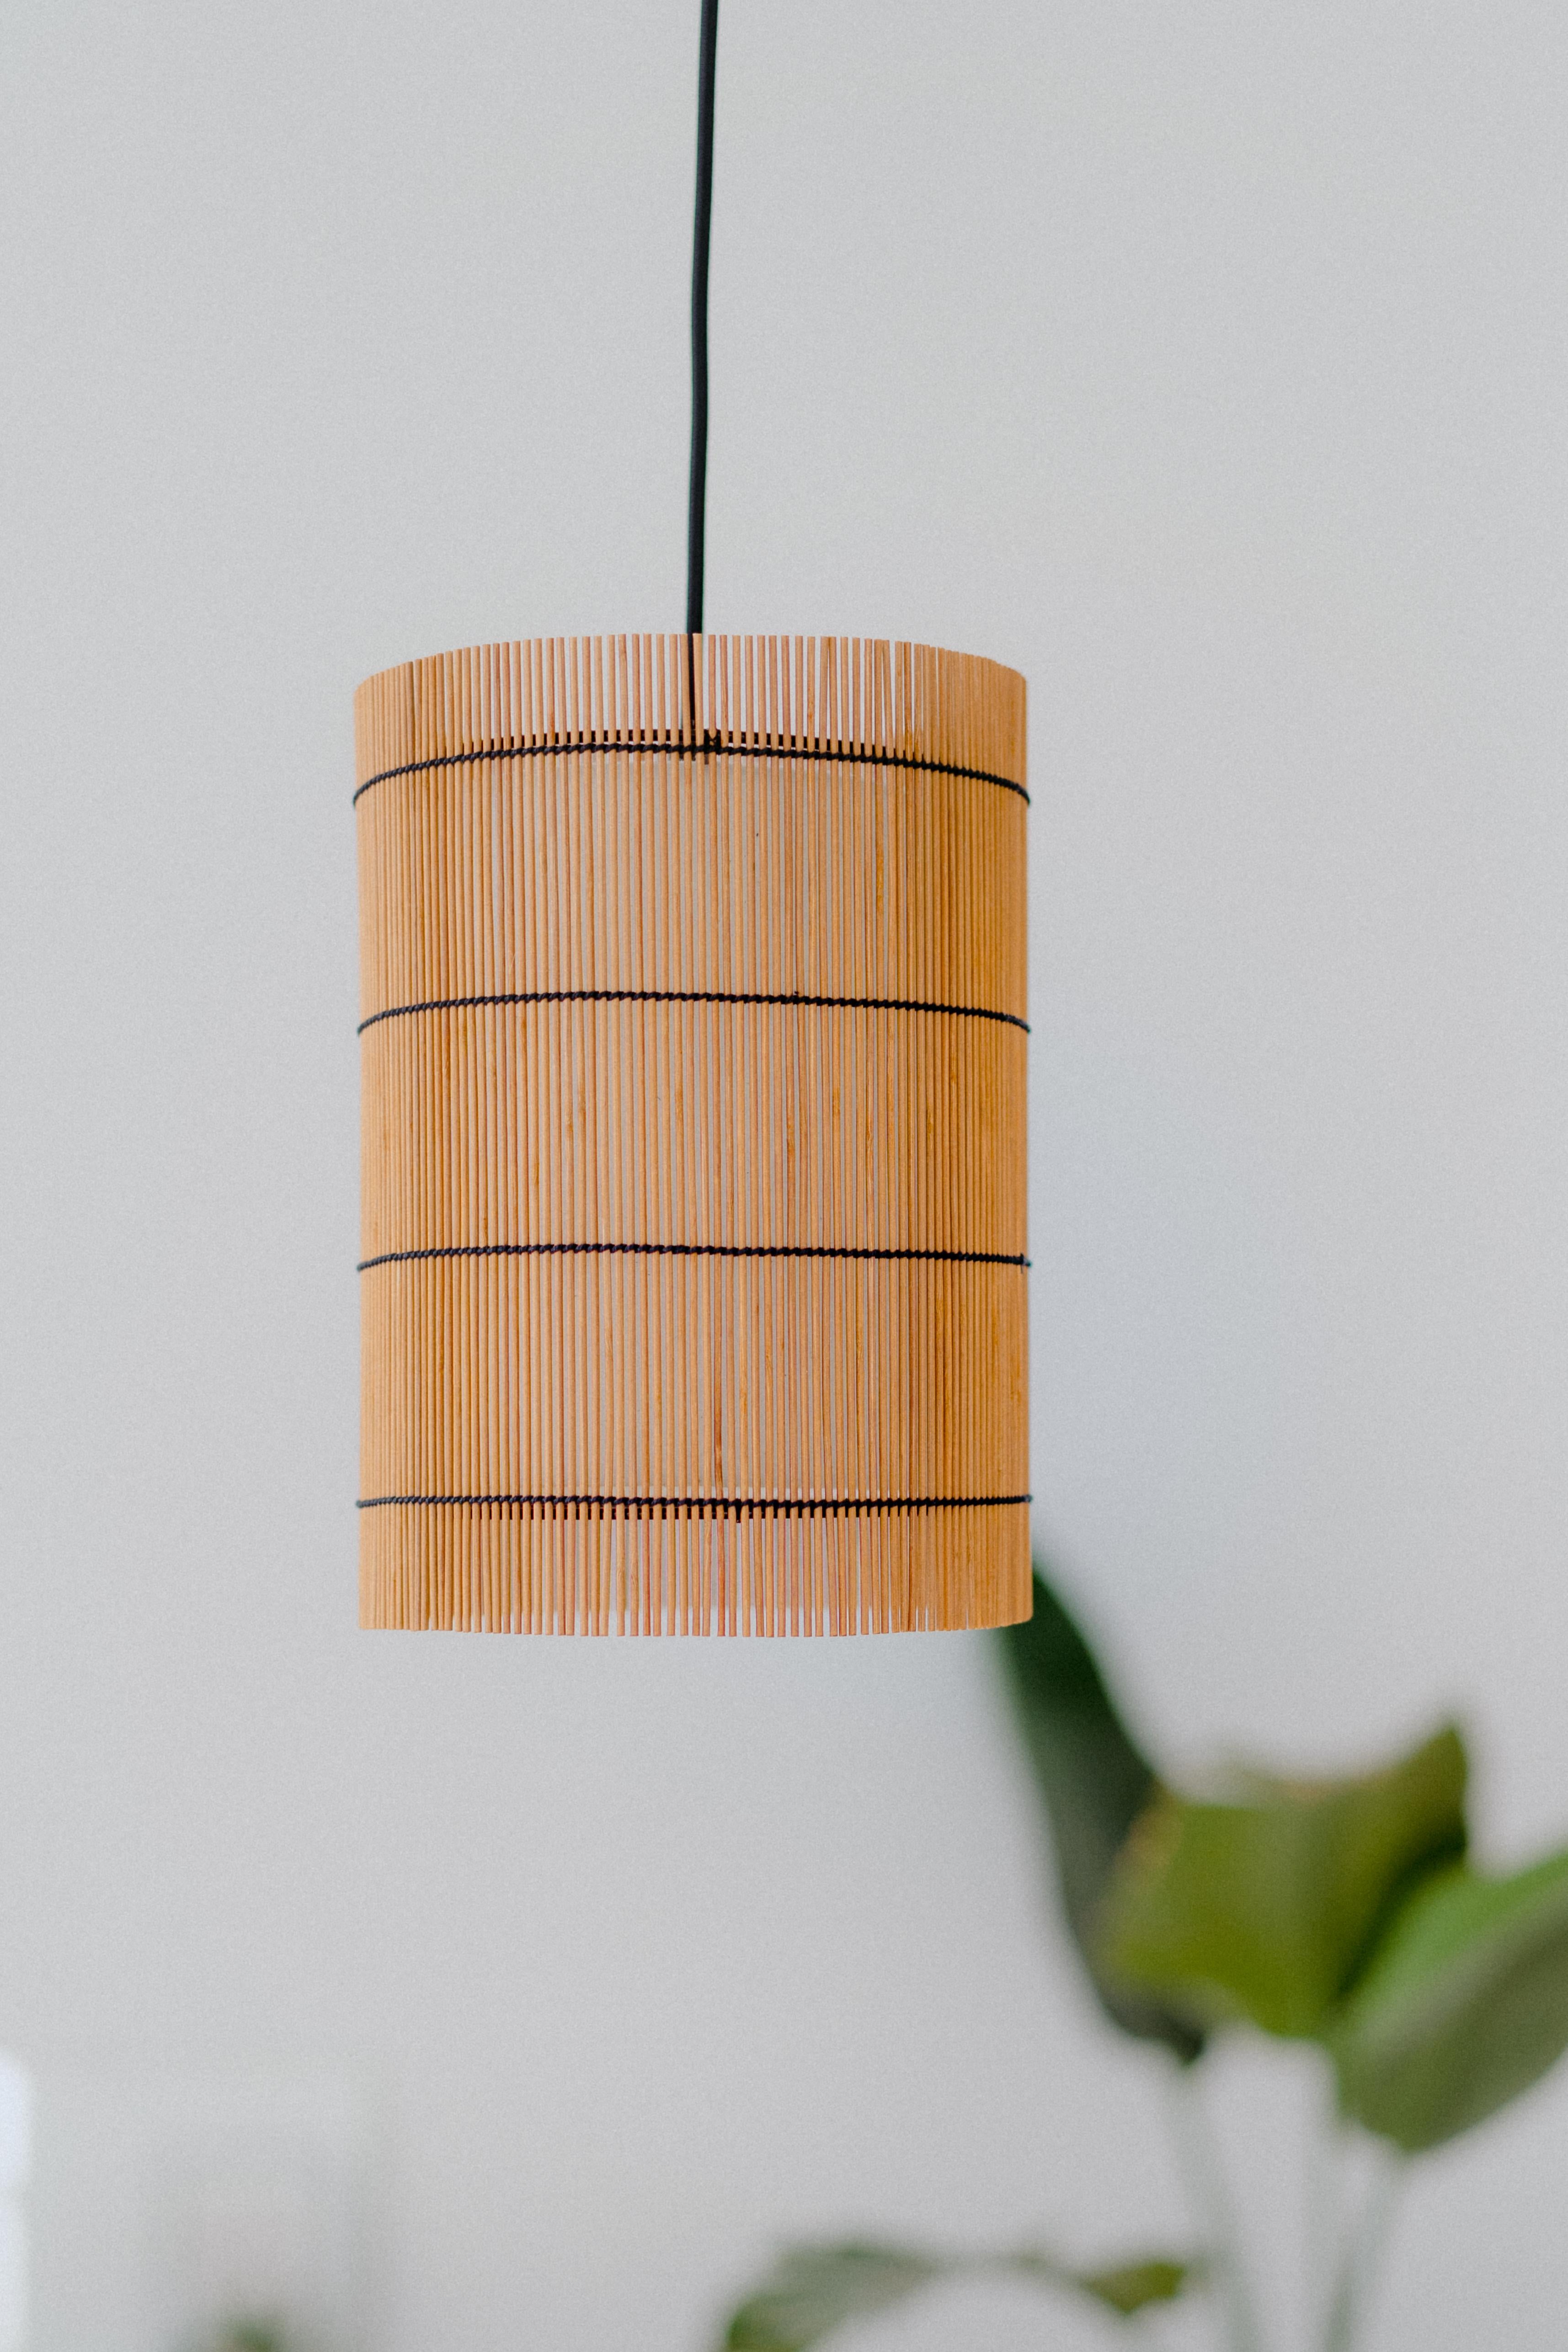 FOC lamps are designed and manufactured by Mediterranean Objects in Barcelona, Spain. 

They consist of an outer shade of cherry-colored dyed bamboo, interwoven with a black thread, just like the structure of the lamp. This lampshade gives a unique